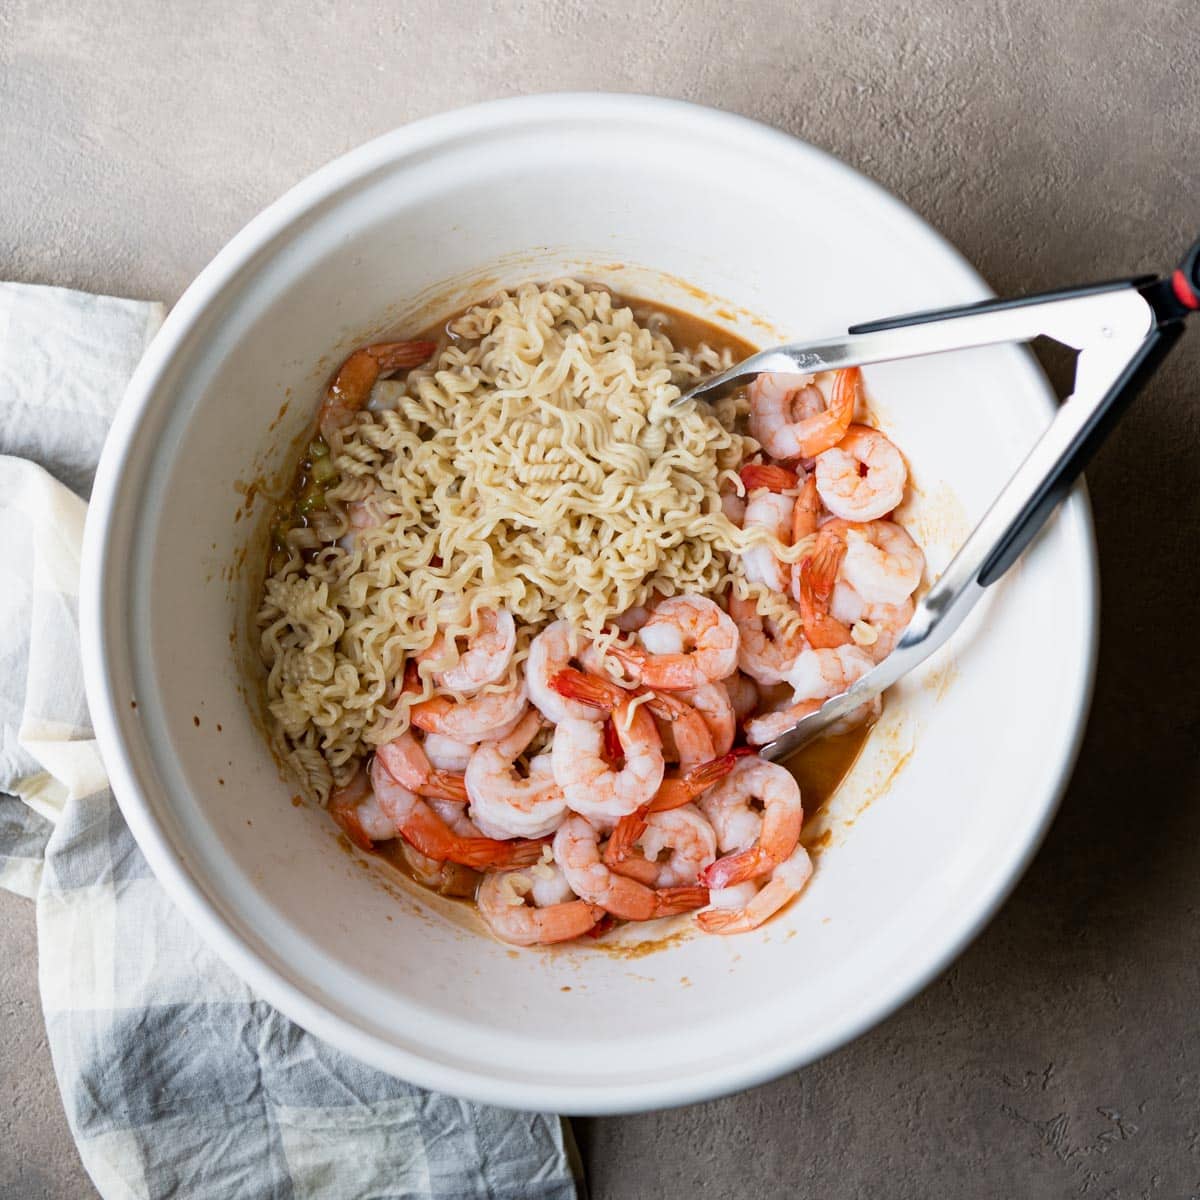 Shrimp and ramen noodles in a white mixing bowl.